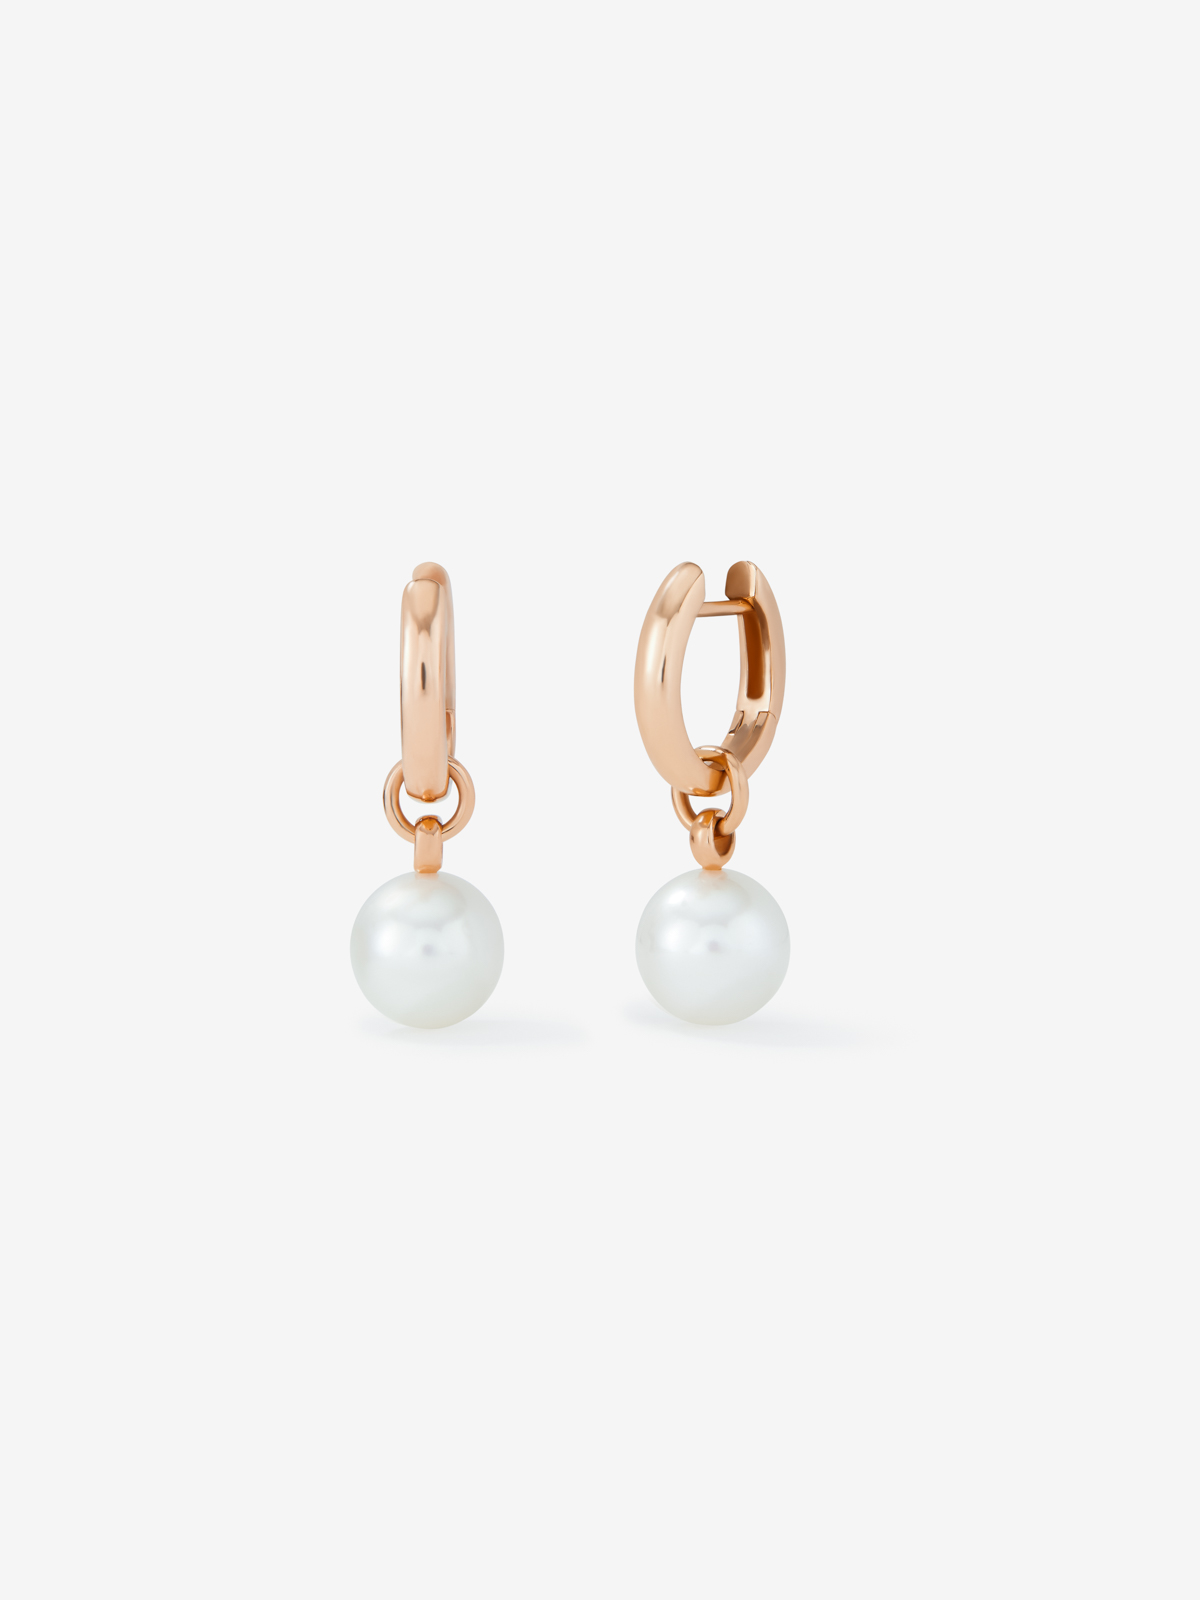 18K rose gold ring pending with 8.5 pearl pearl pendant